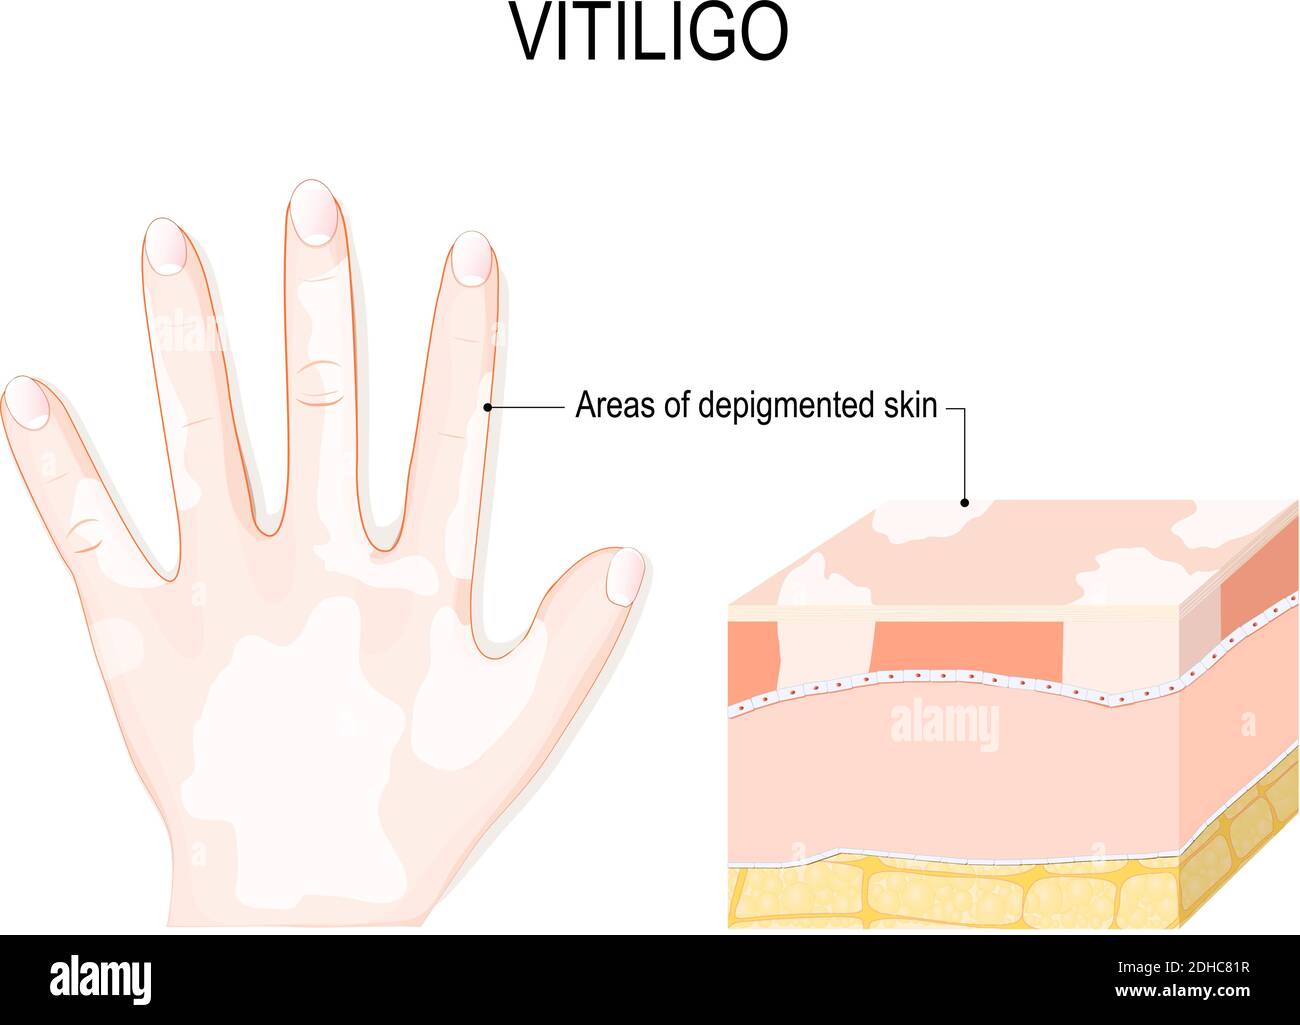 Vitiligo. Is a skin condition characterized by portions of the skin losing their pigment. It occurs when skin pigment cells (melanocytes) Stock Vector